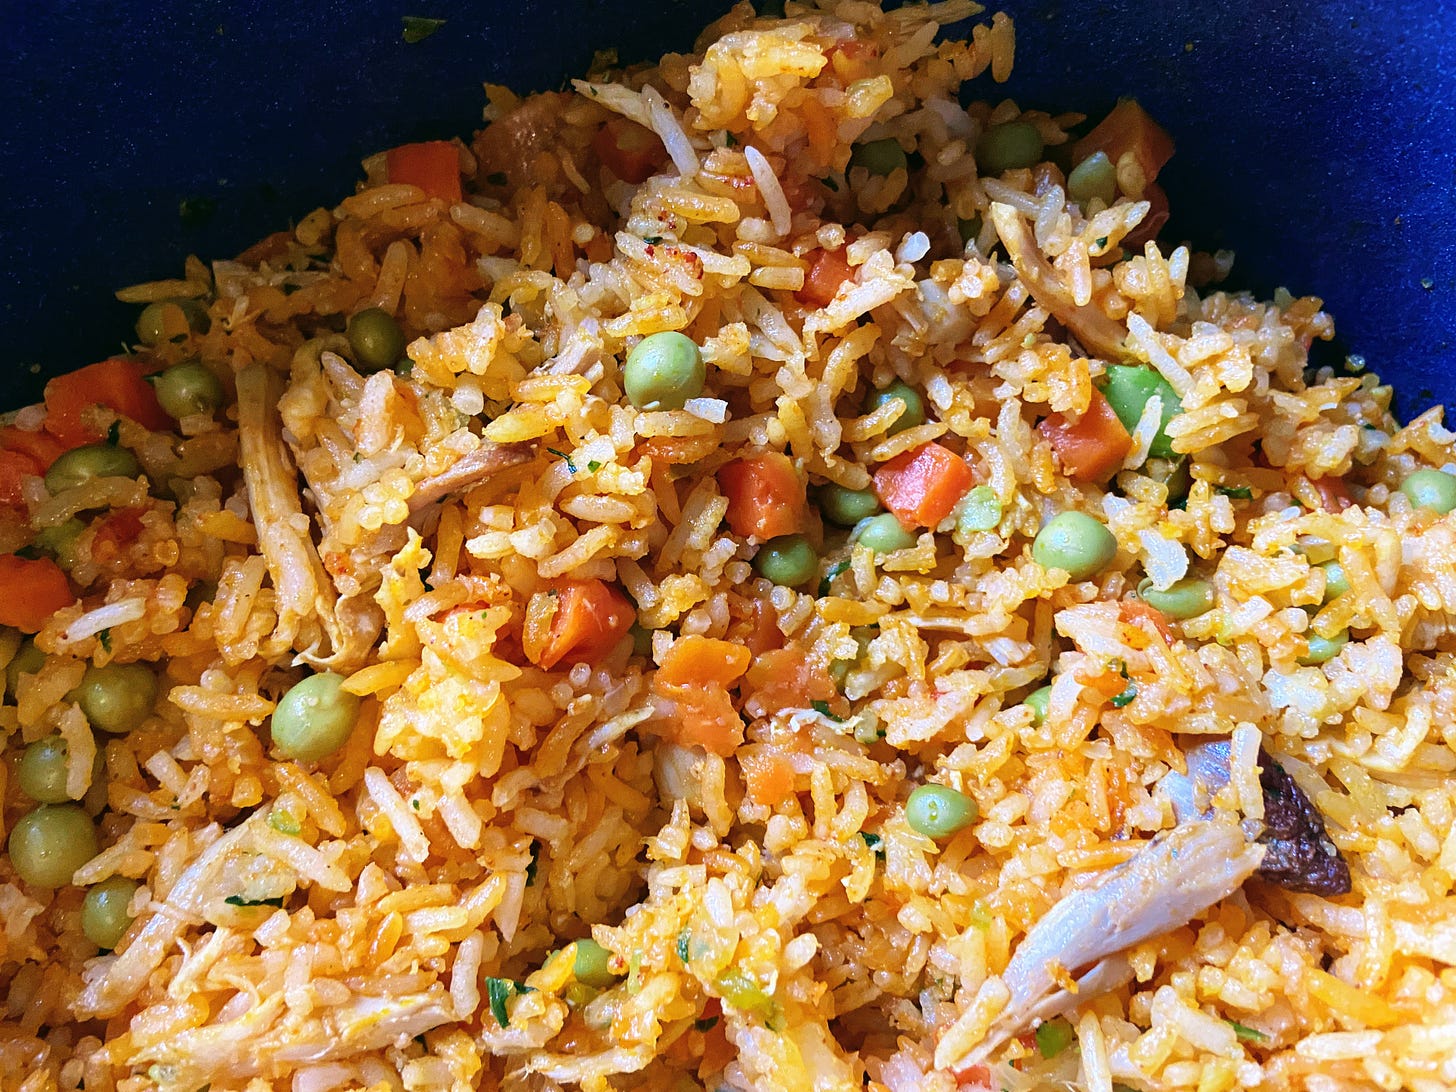 Close-up of Costa Rican dish arroz con pollo, with orange rice, vegetables, chicken mixed together